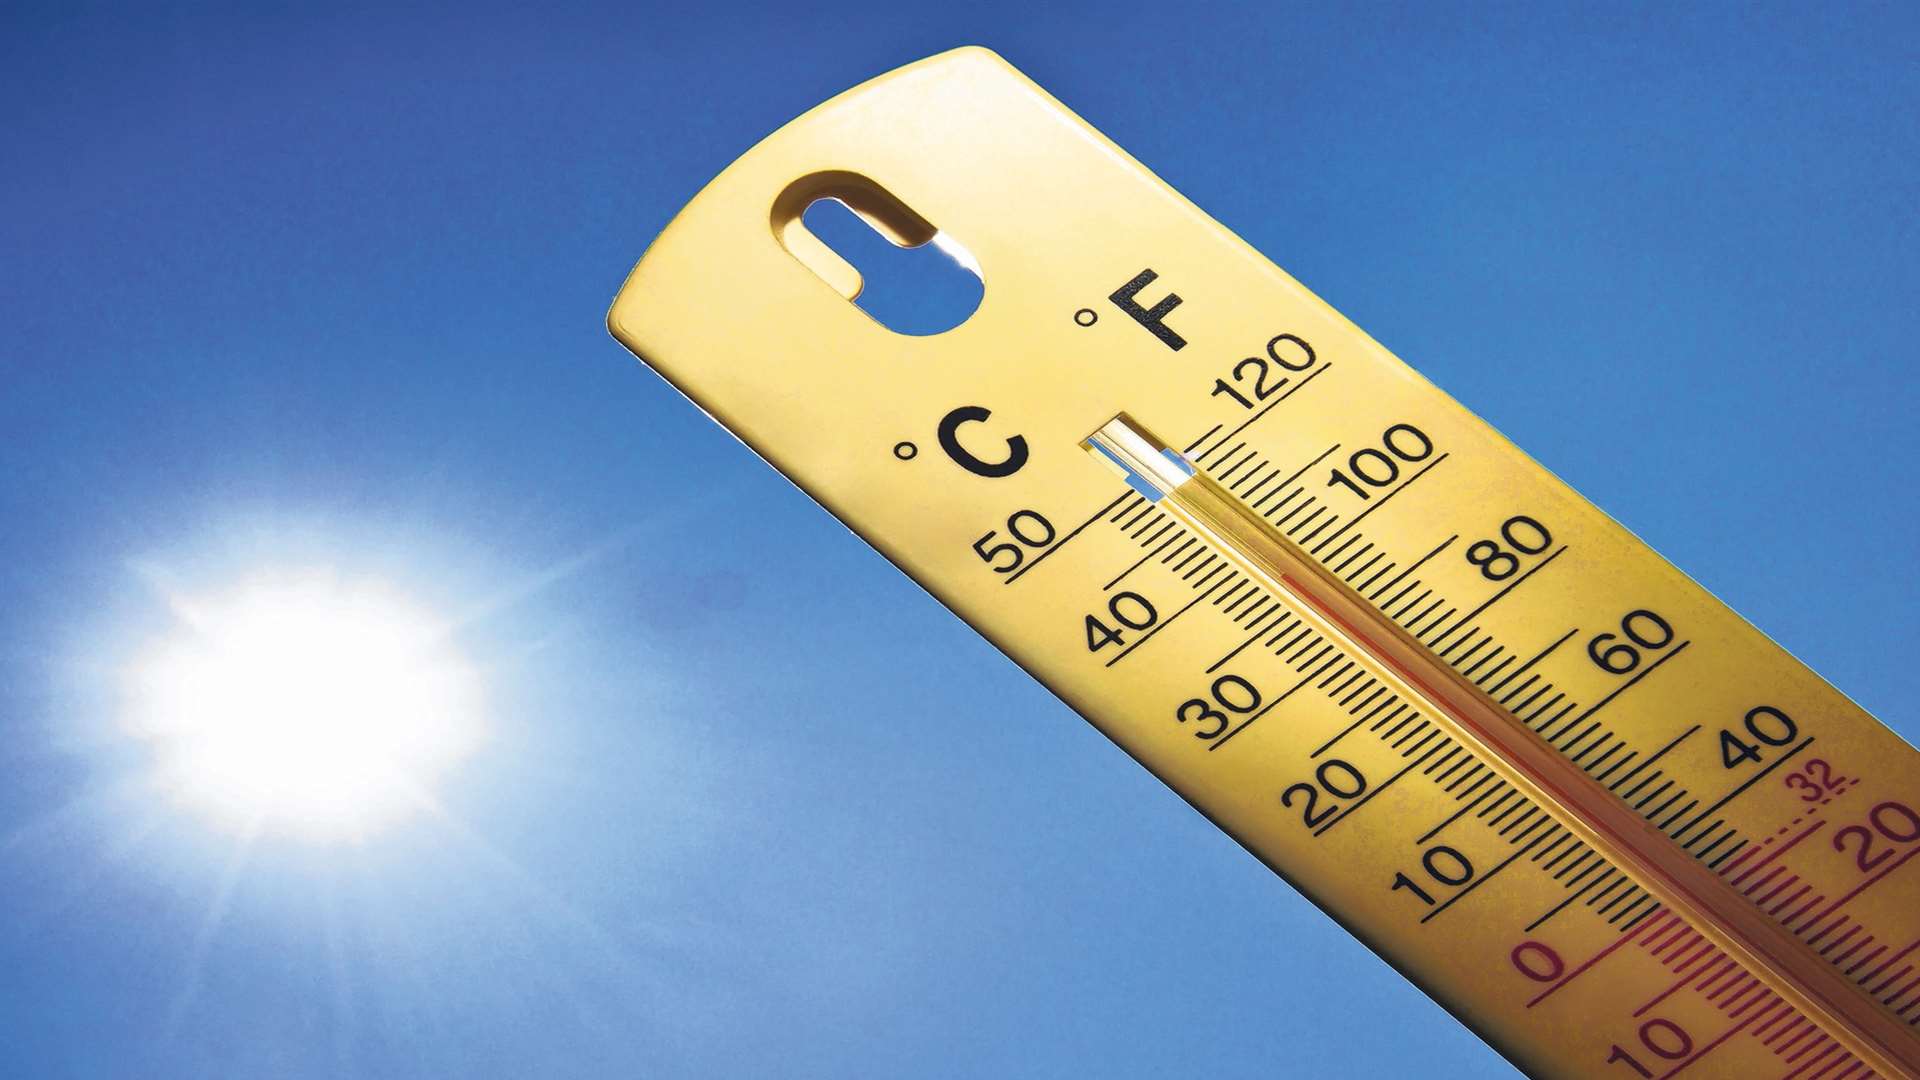 Temperatures of nearly 34 degrees were recorded yesterday